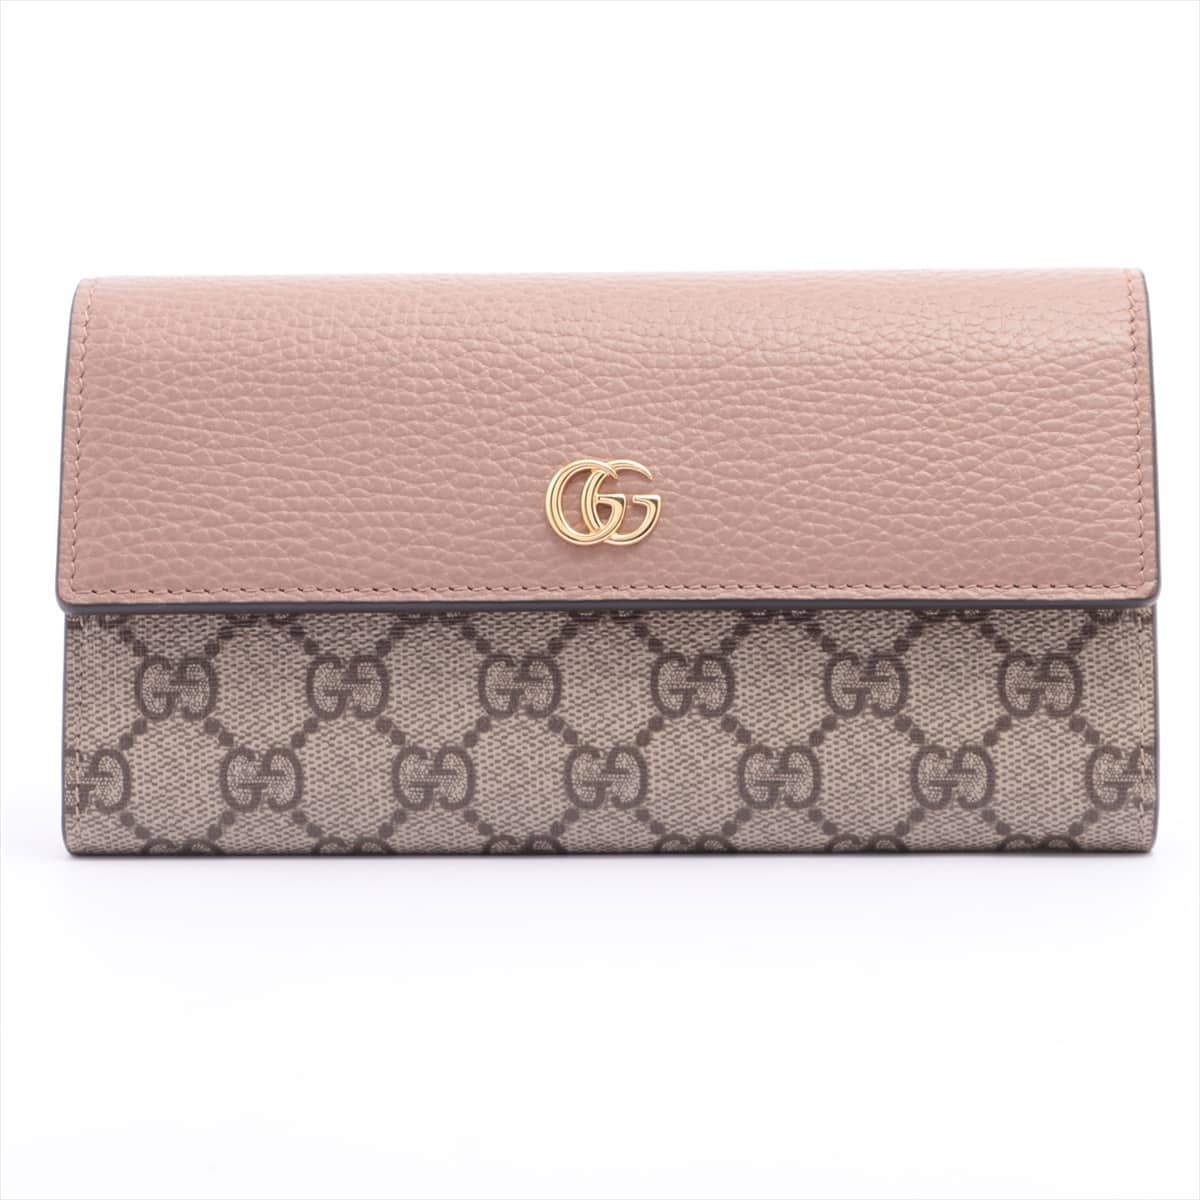 Gucci GG Marmont 456116 PVC & leather Wallet Beige×Pink